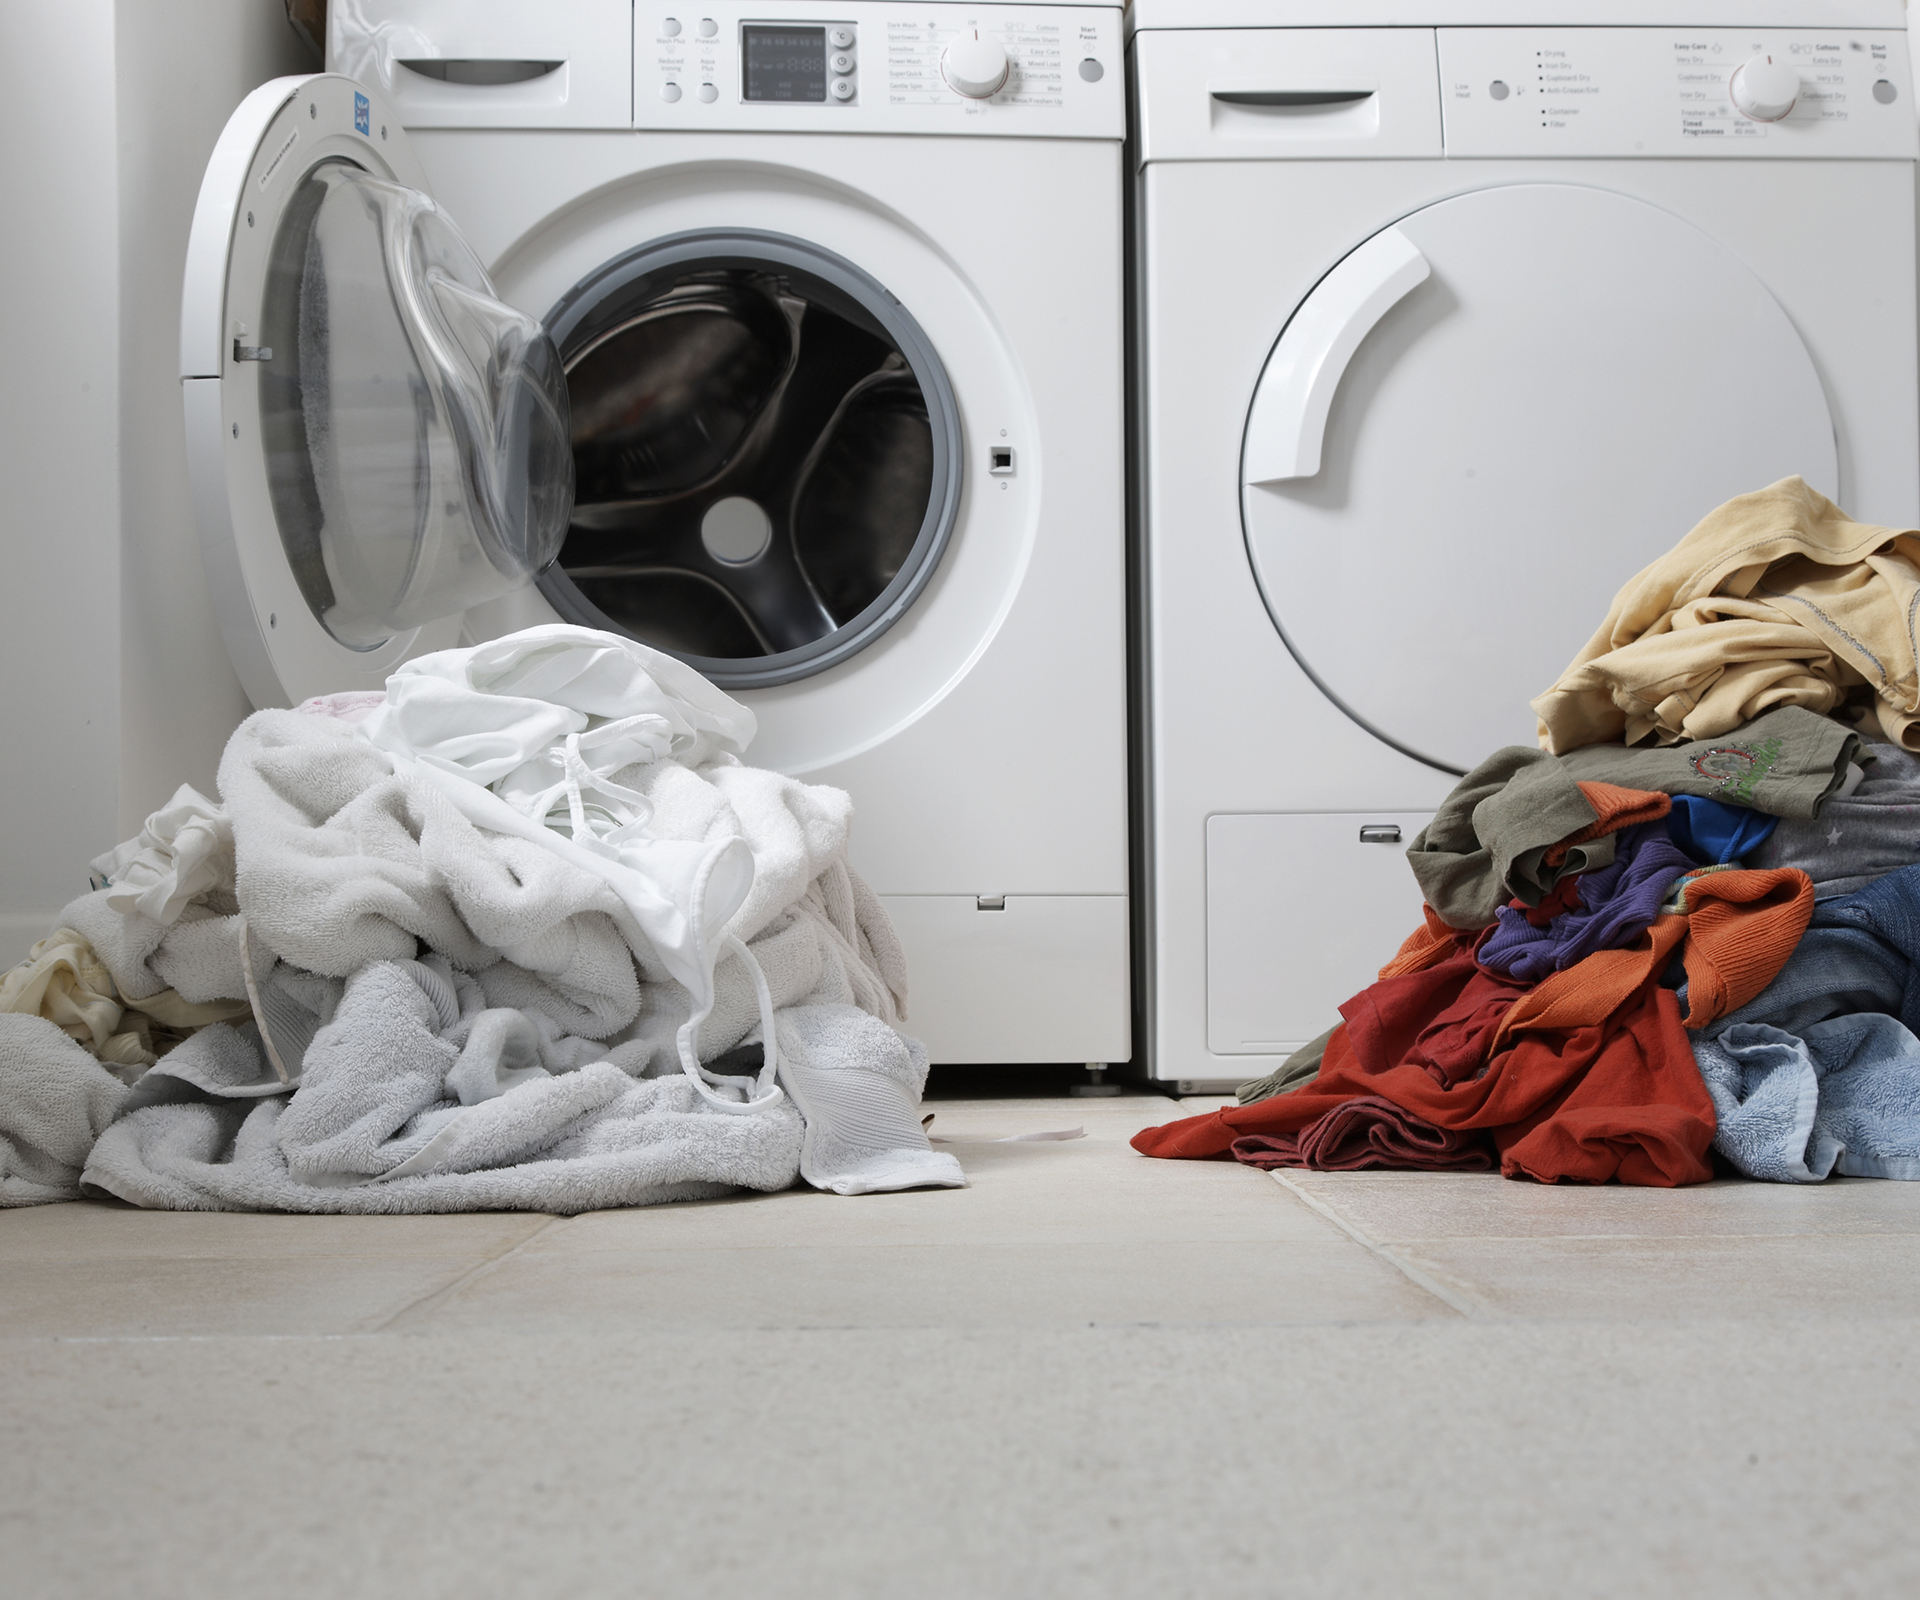 Washing machines linked to house fires prompt nation-wide recall